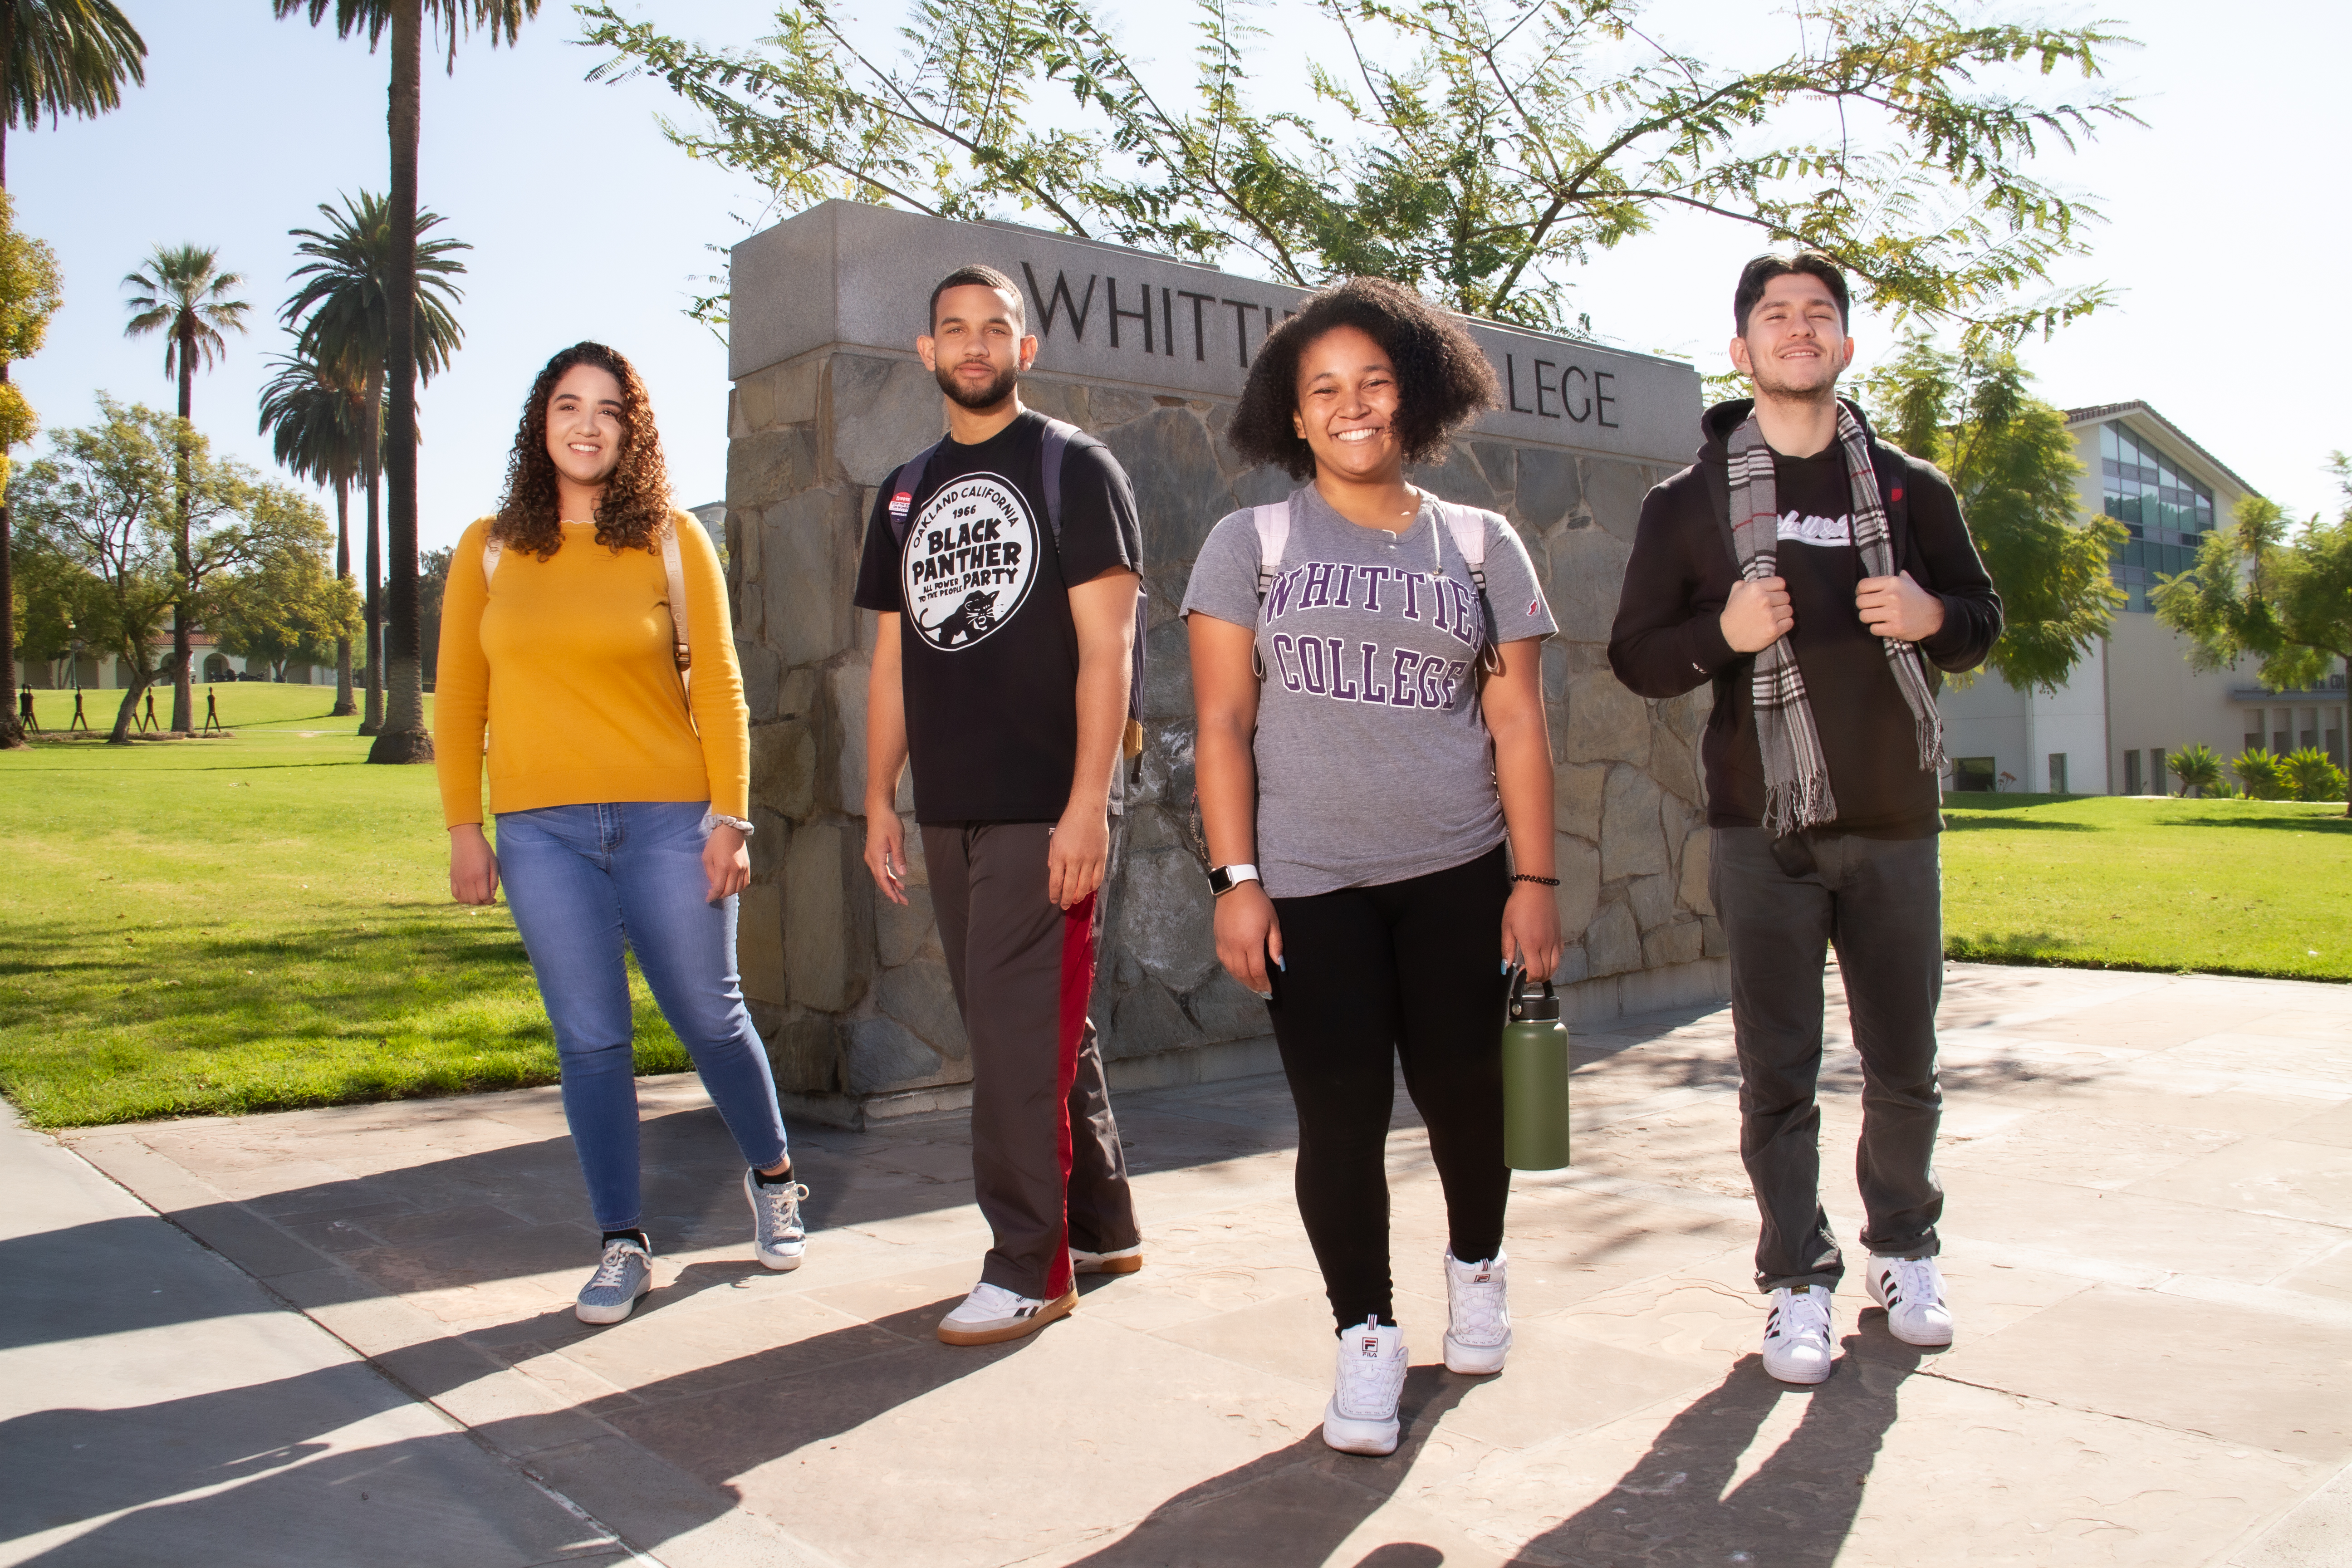 Whittier College students on campus